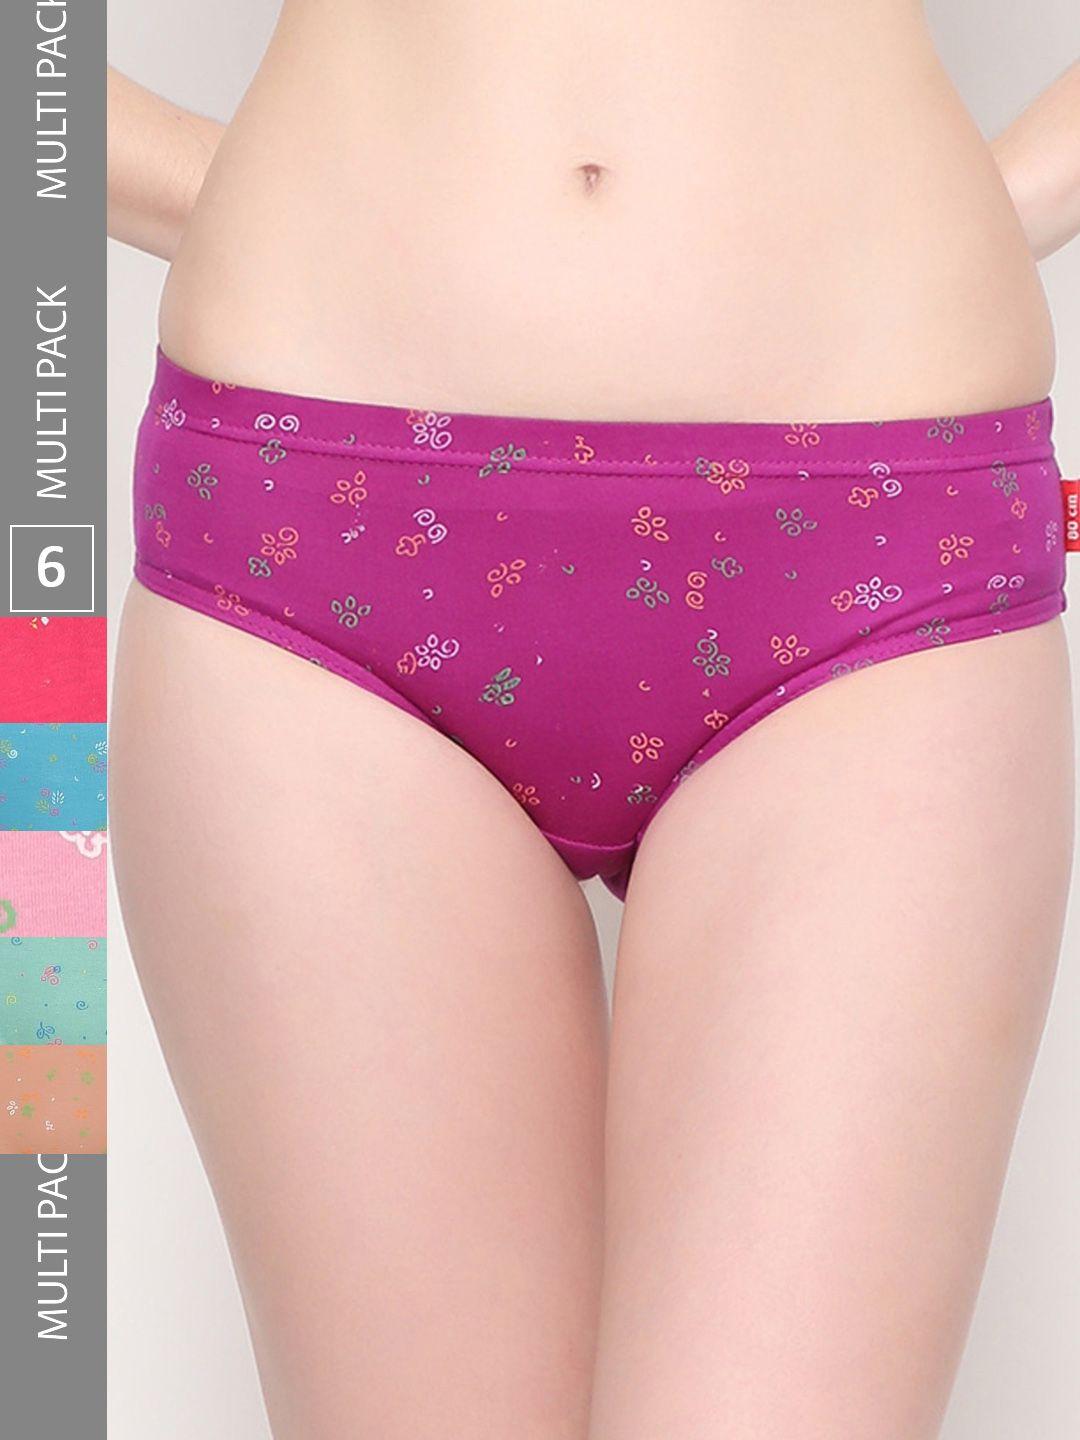 outflits-women-pack-of-6-floral-printed-mid-rise-cotton-basic-briefs